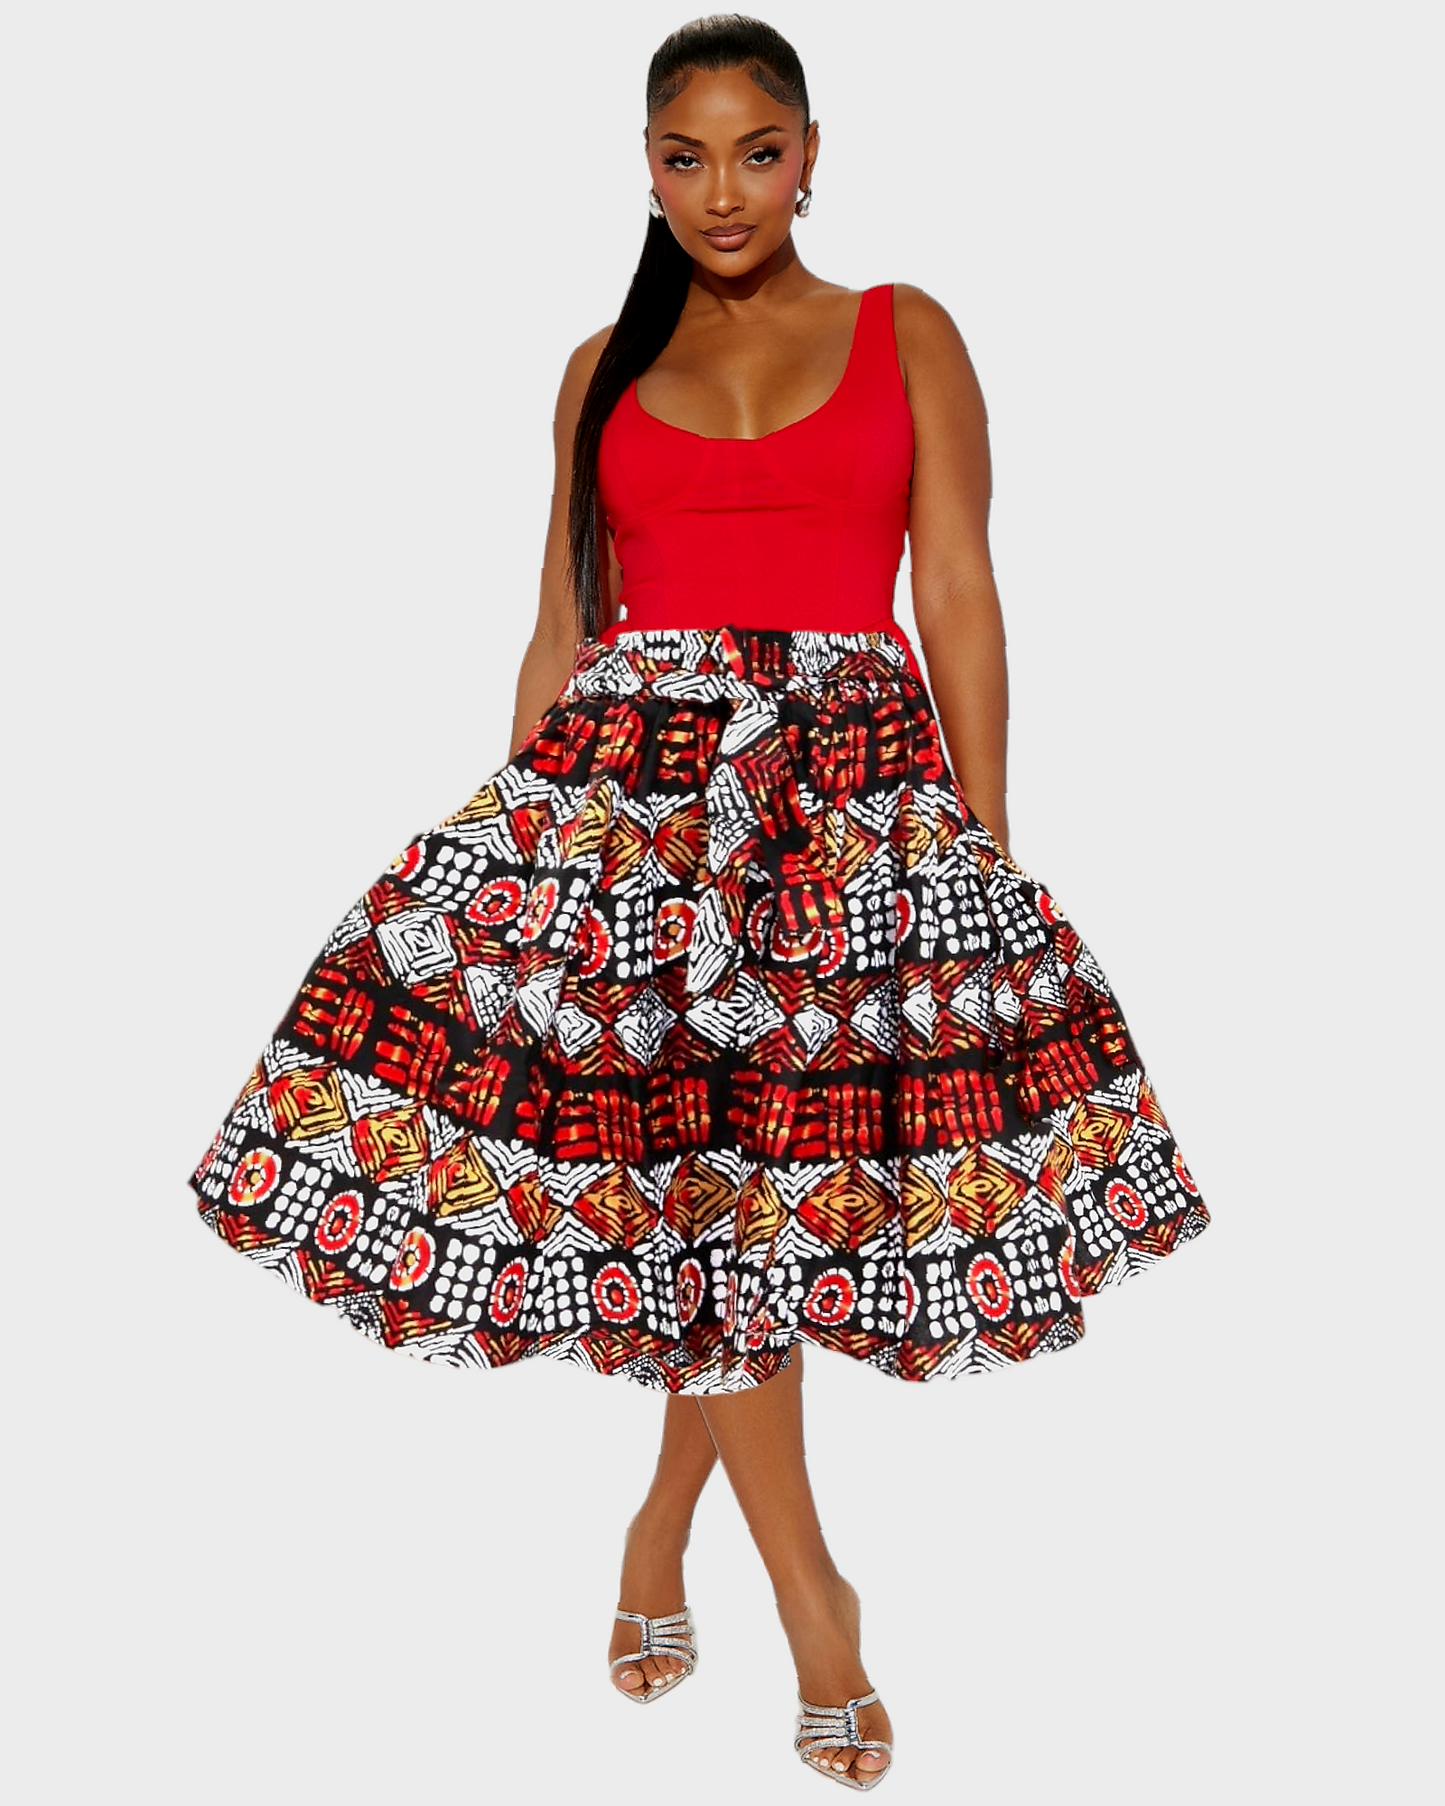 7012 Woman Mid Length Flared skirt- 576Red/White